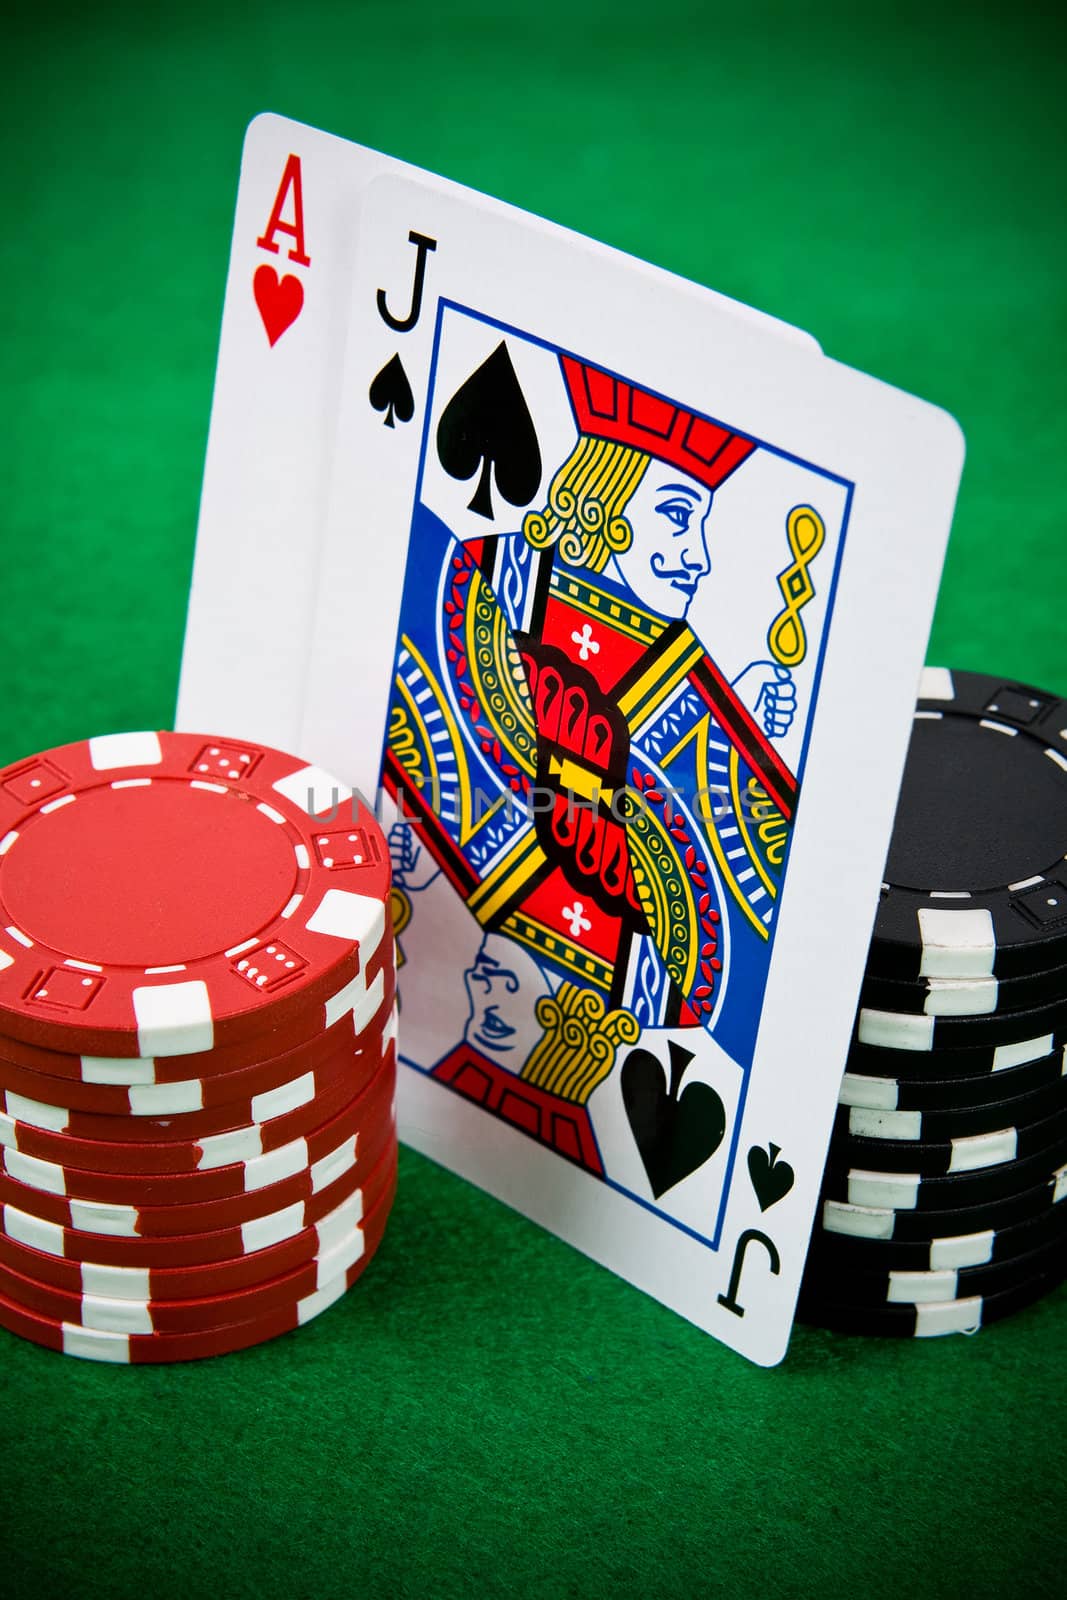 Ace of hearts and black jack with black and red poker chips on green poker table.